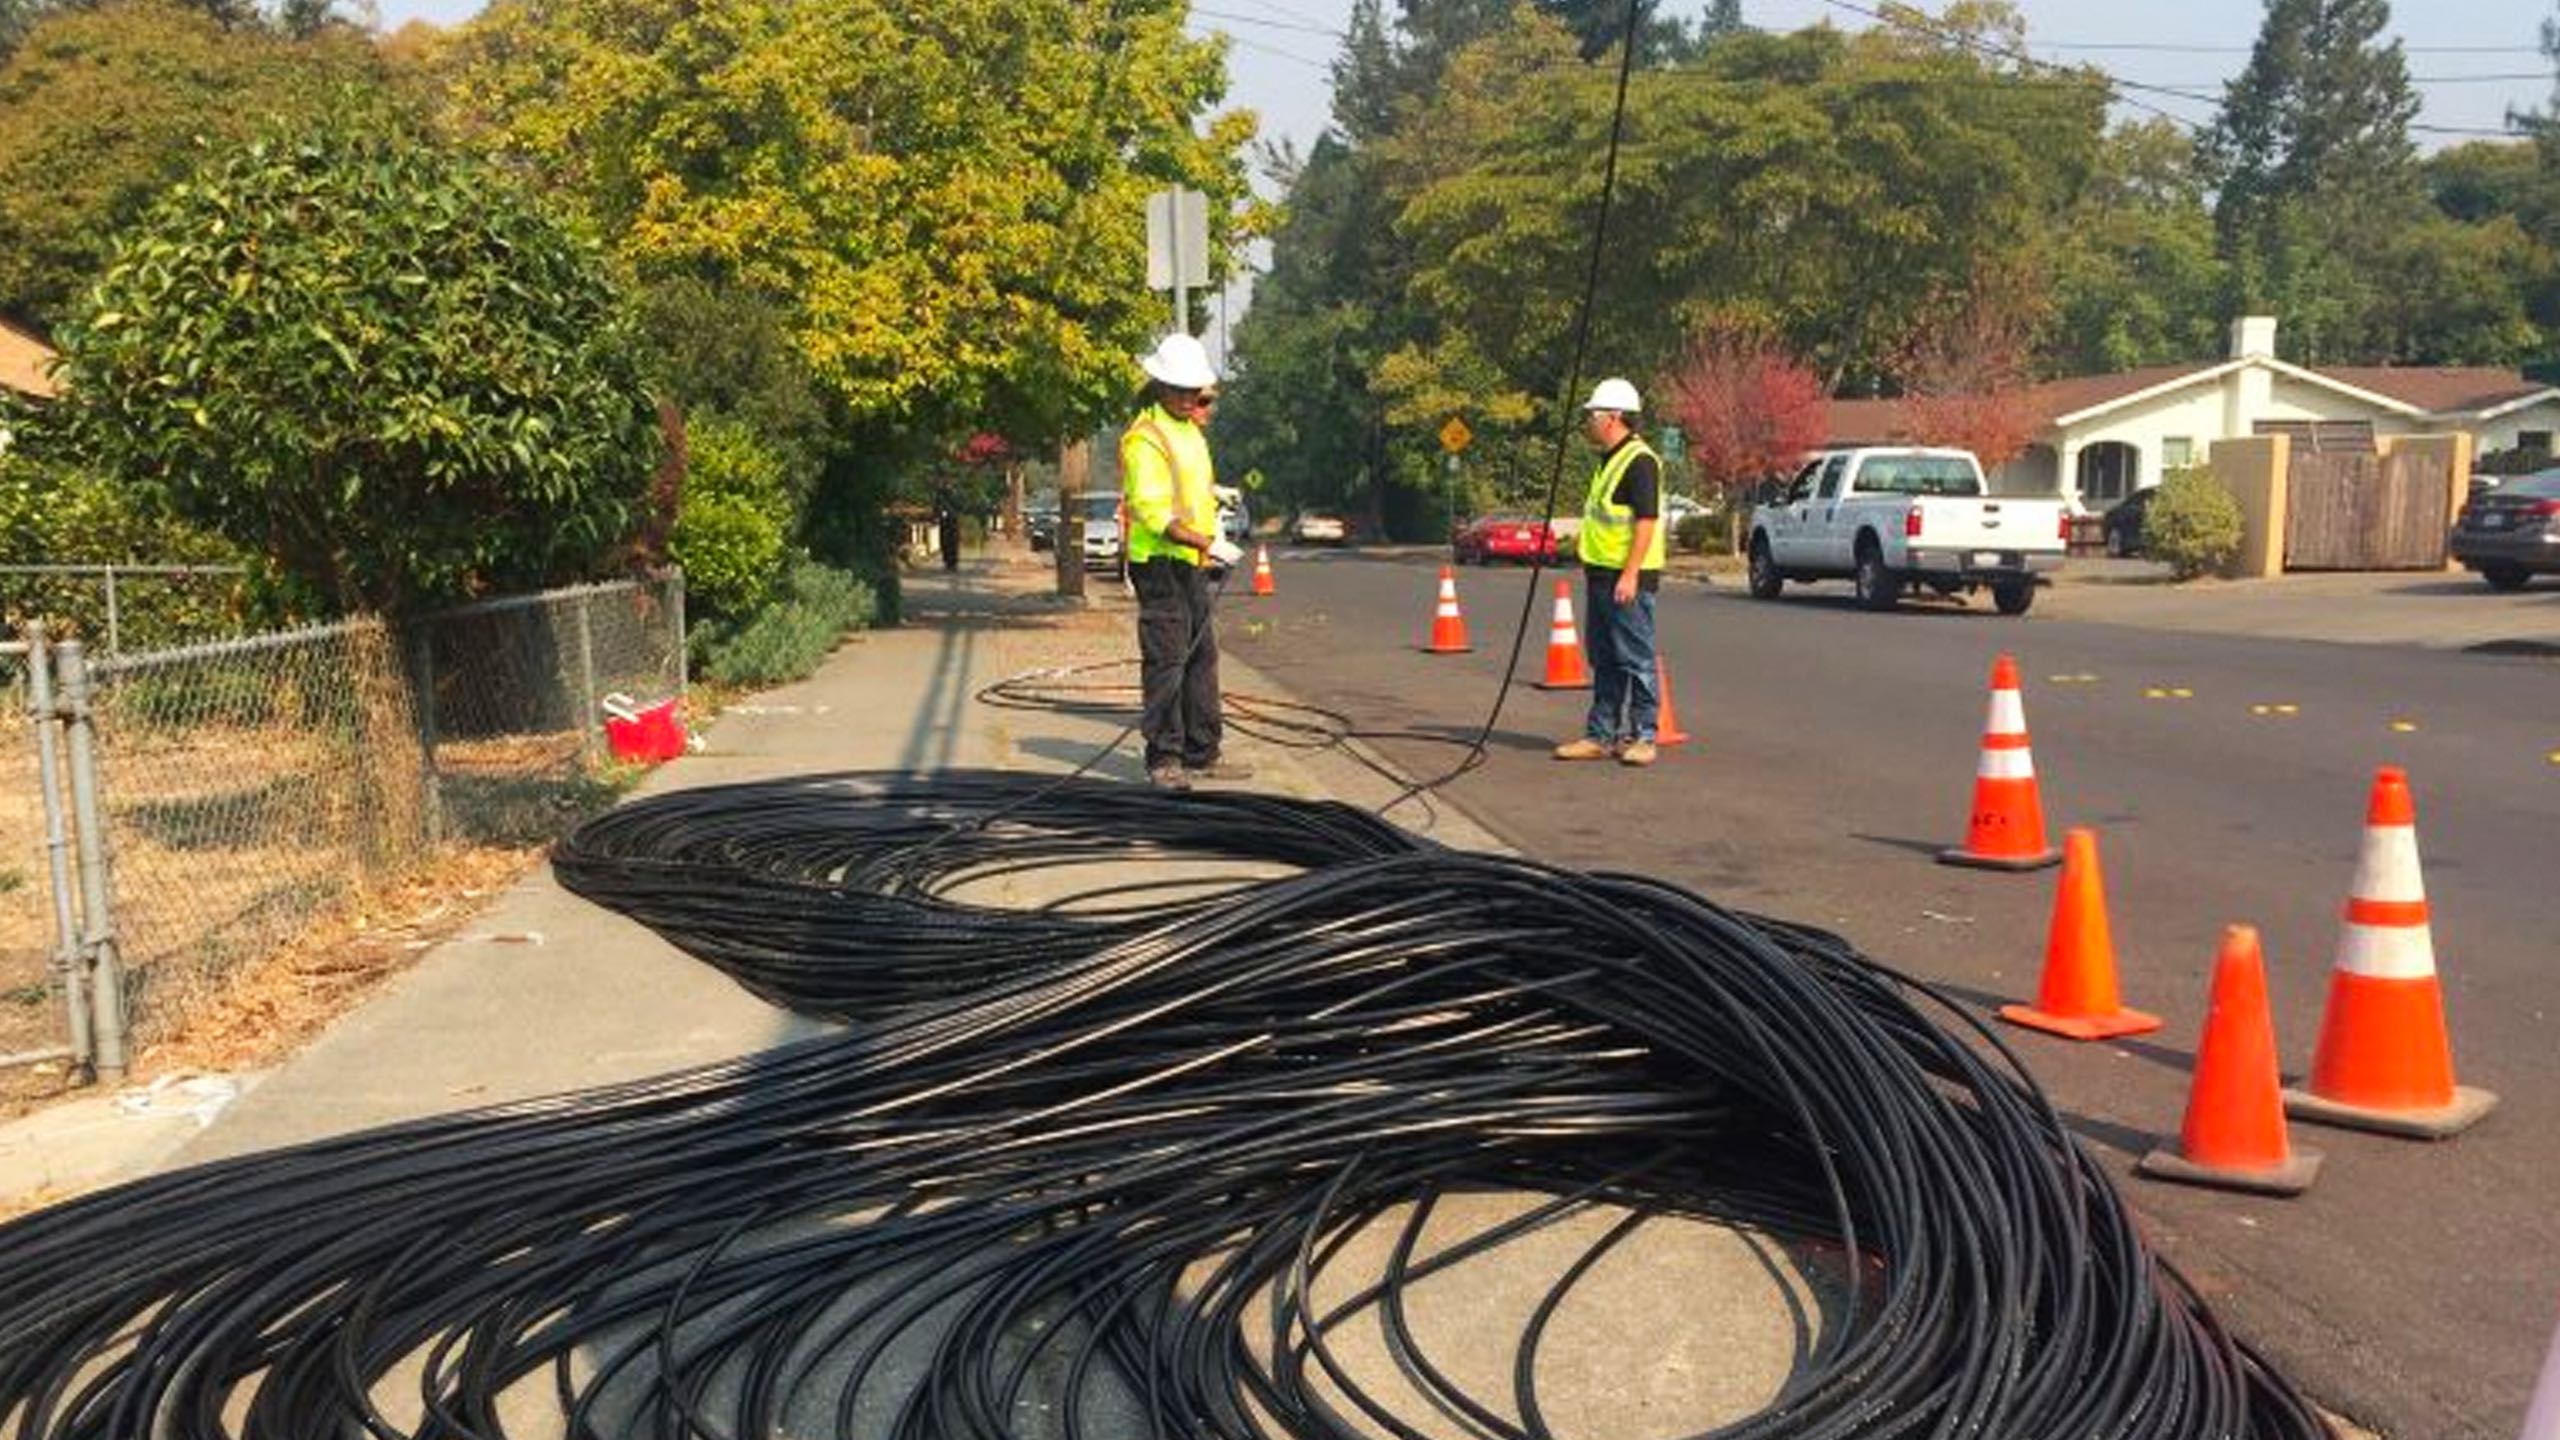 Sonic installers on the street with fiber cables